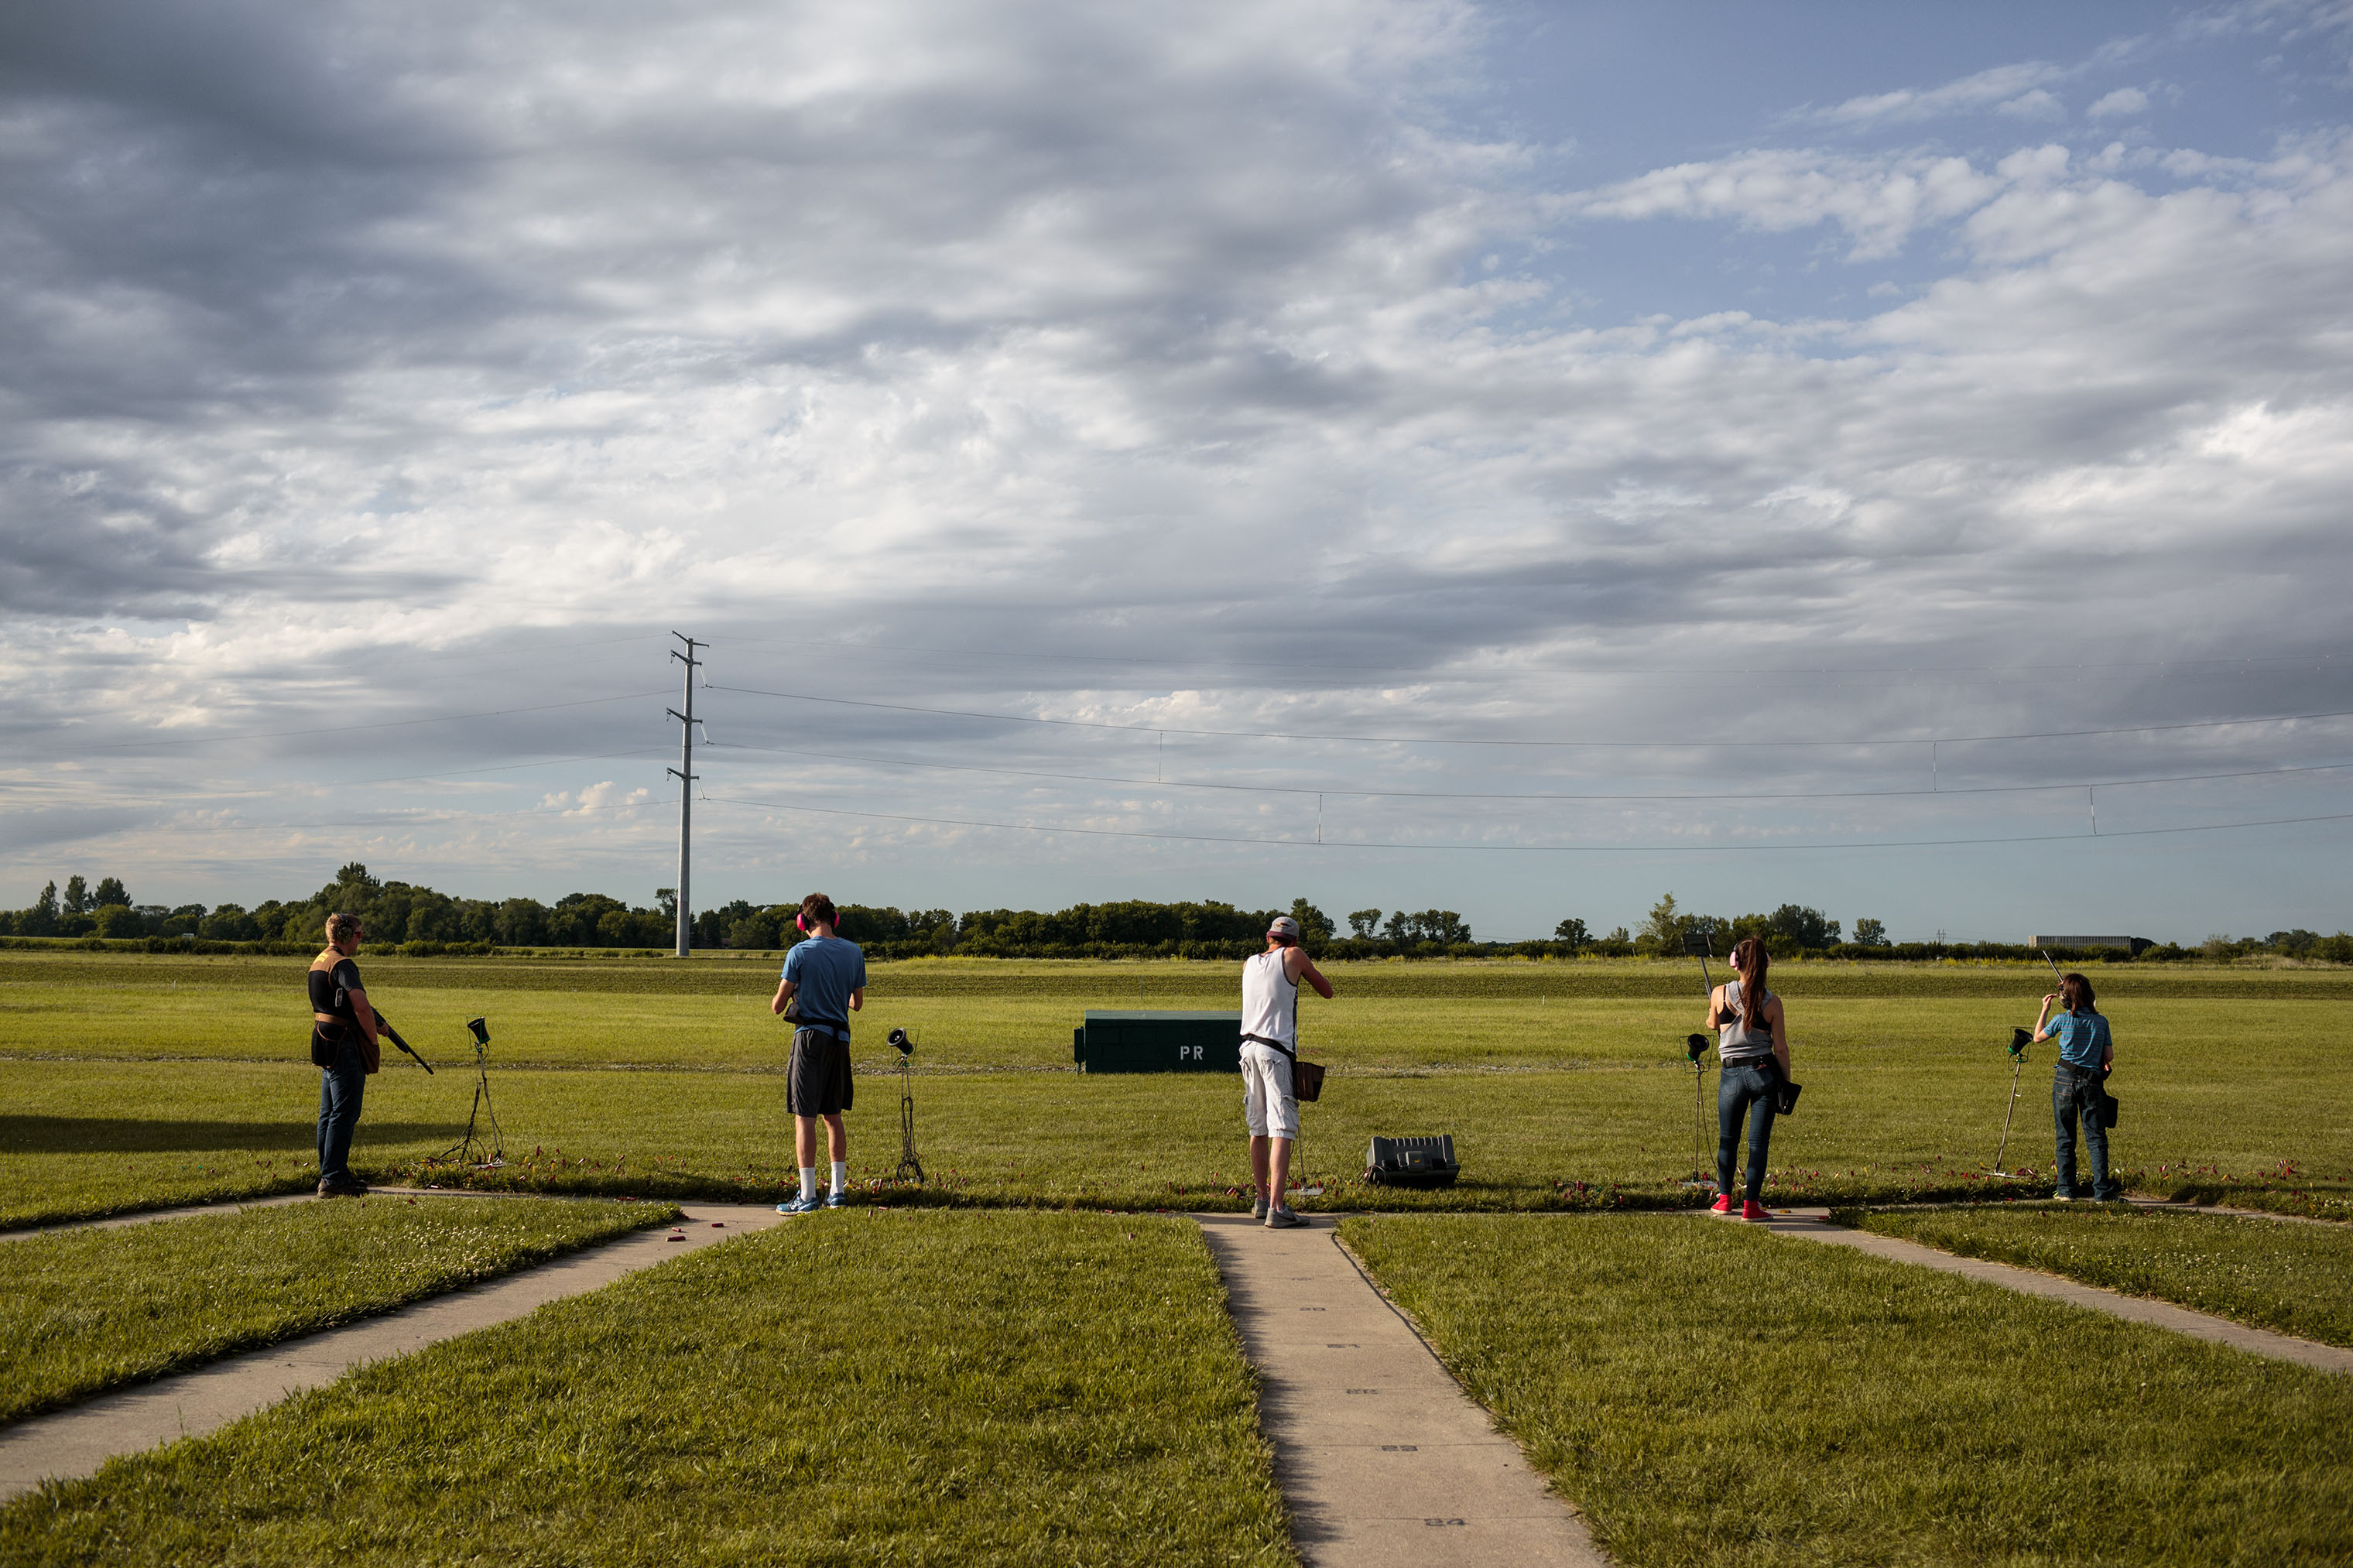 Students from Eyota practice shooting before competing at the trap shooting championship. (Sarah Blesener for TIME)